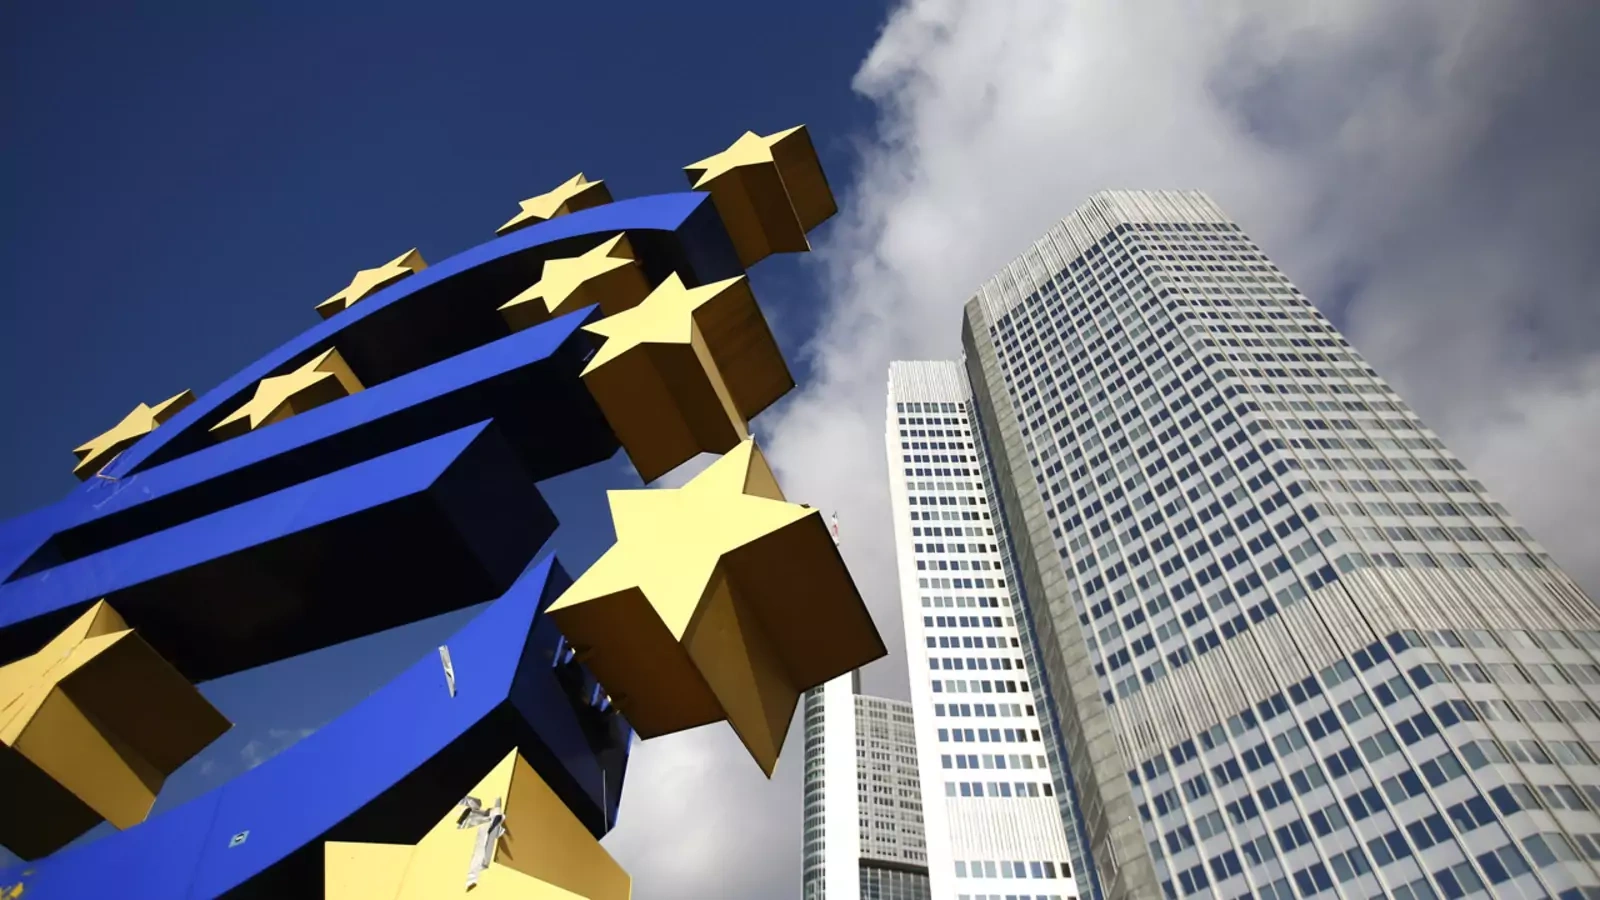 A euro currency sign advertises the European Central Bank (ECB) headquarters in Frankfurt, Germany.